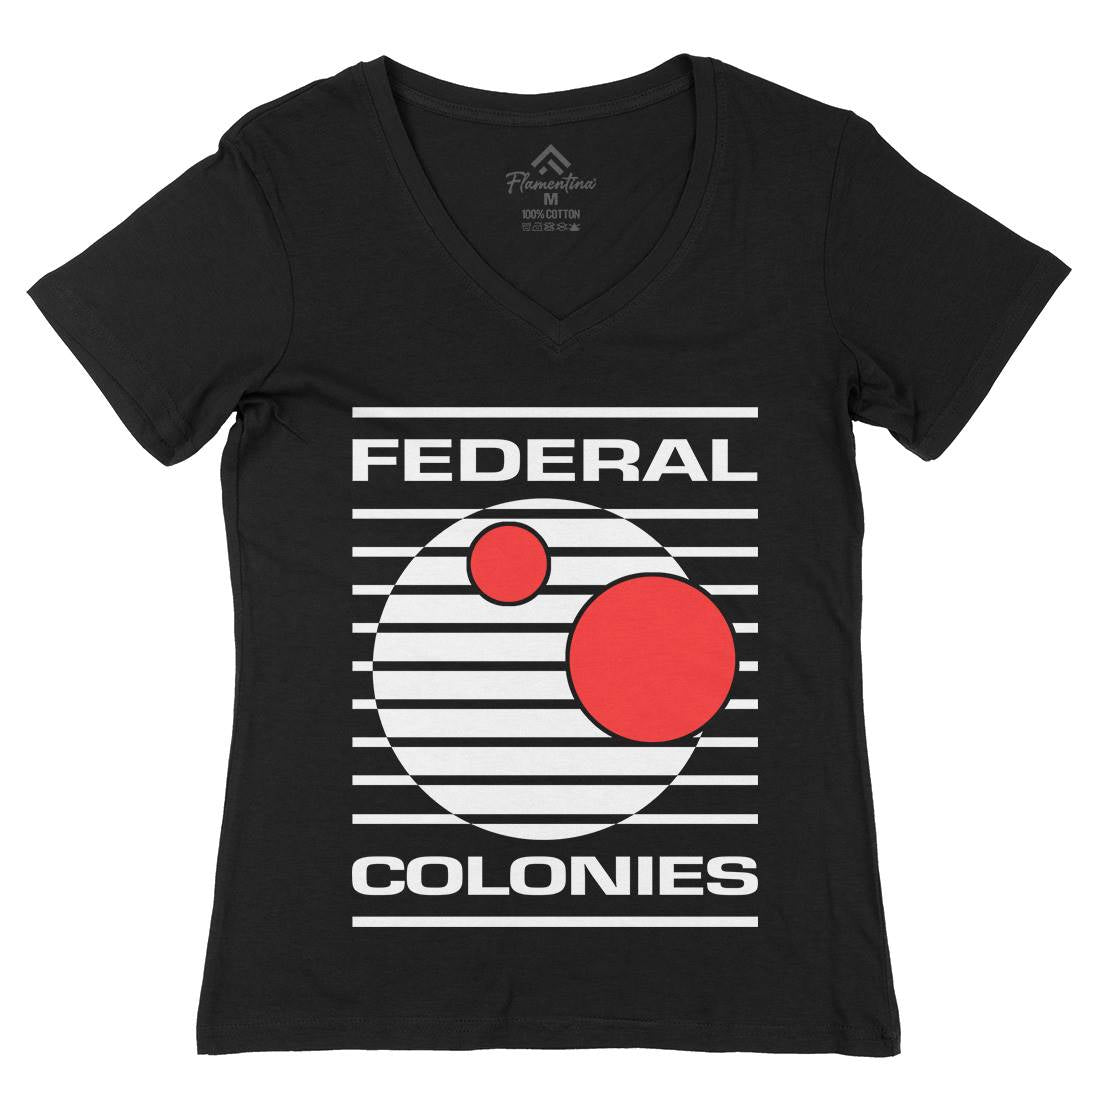 Federal Colonies Womens Organic V-Neck T-Shirt Space D409